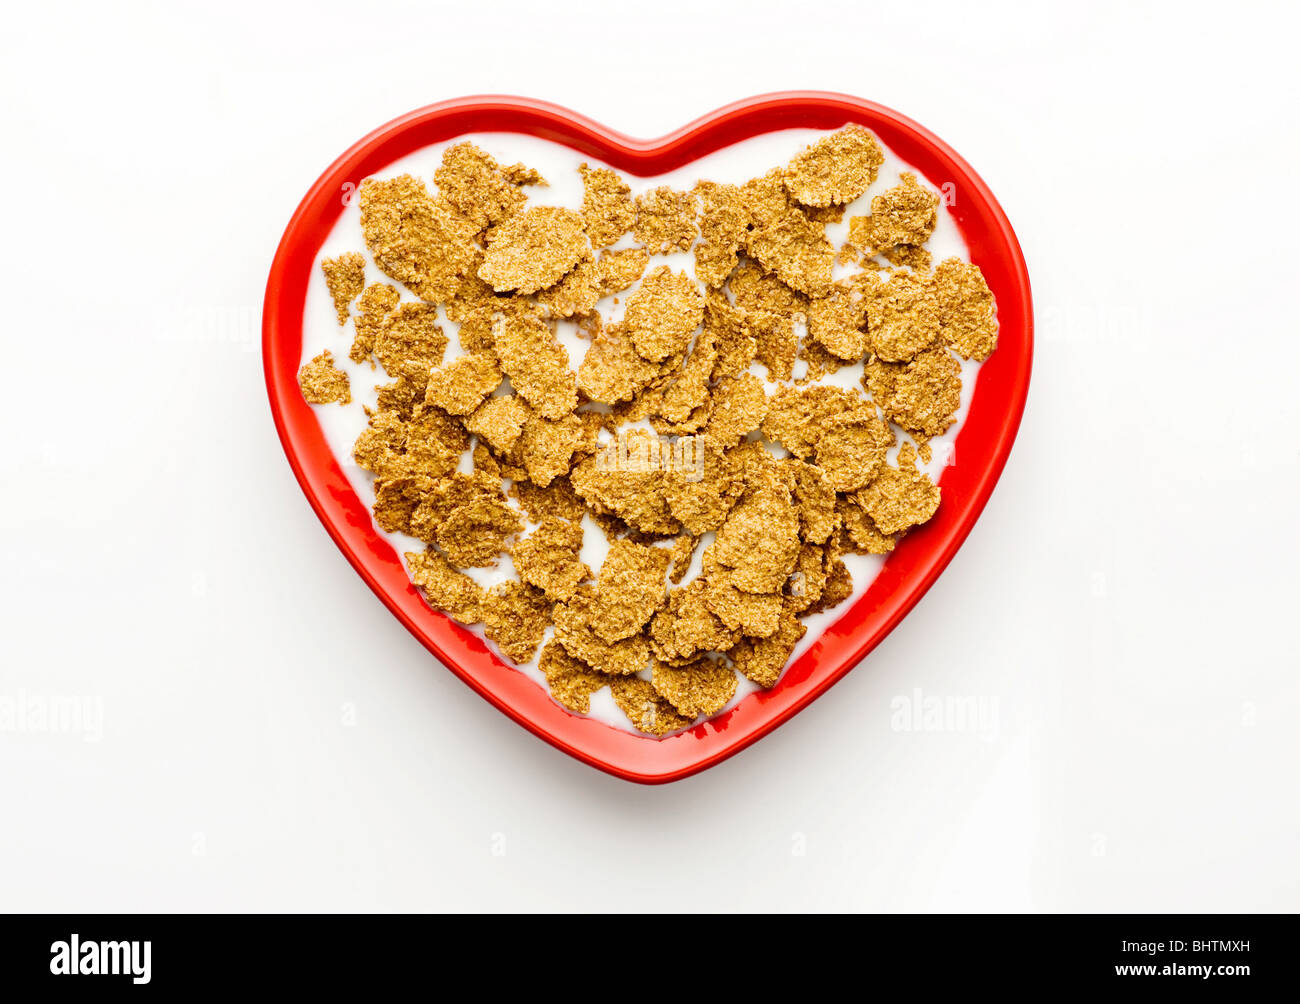 Studio shot of red heart shaped bowl from above with bran flakes and milk on a white background Stock Photo